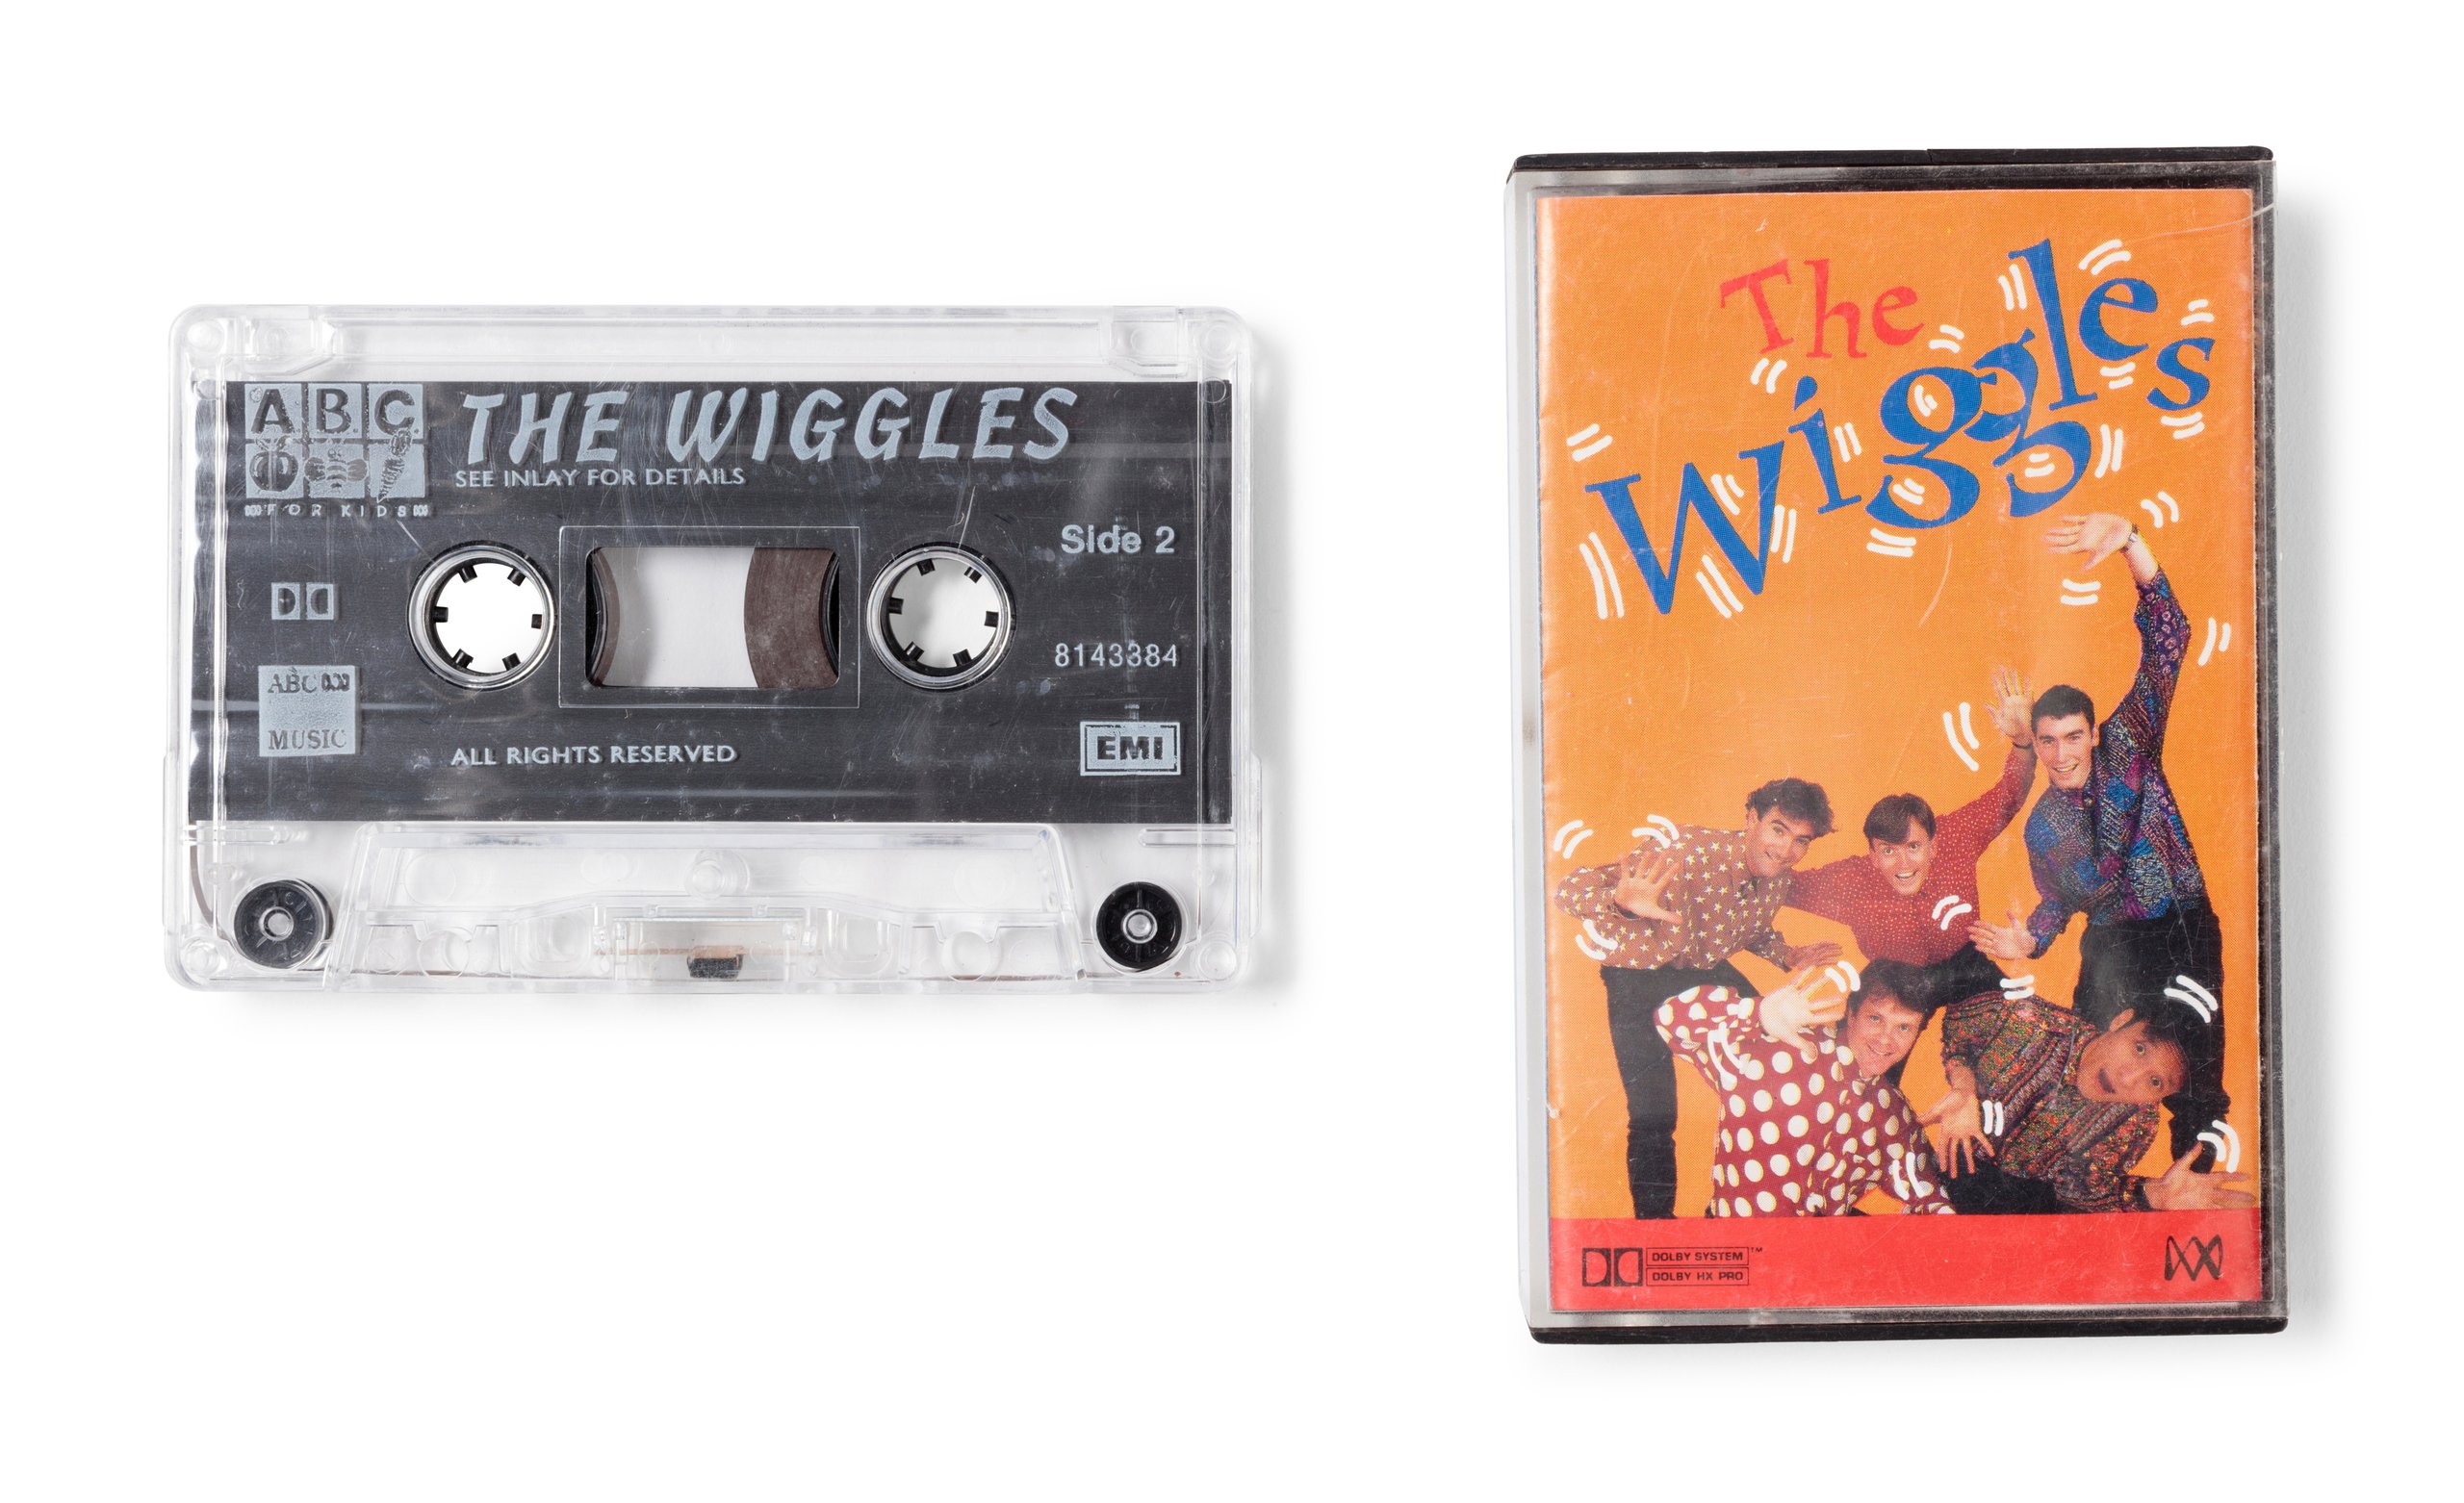 'The Wiggles' audio cassette by The Wiggles